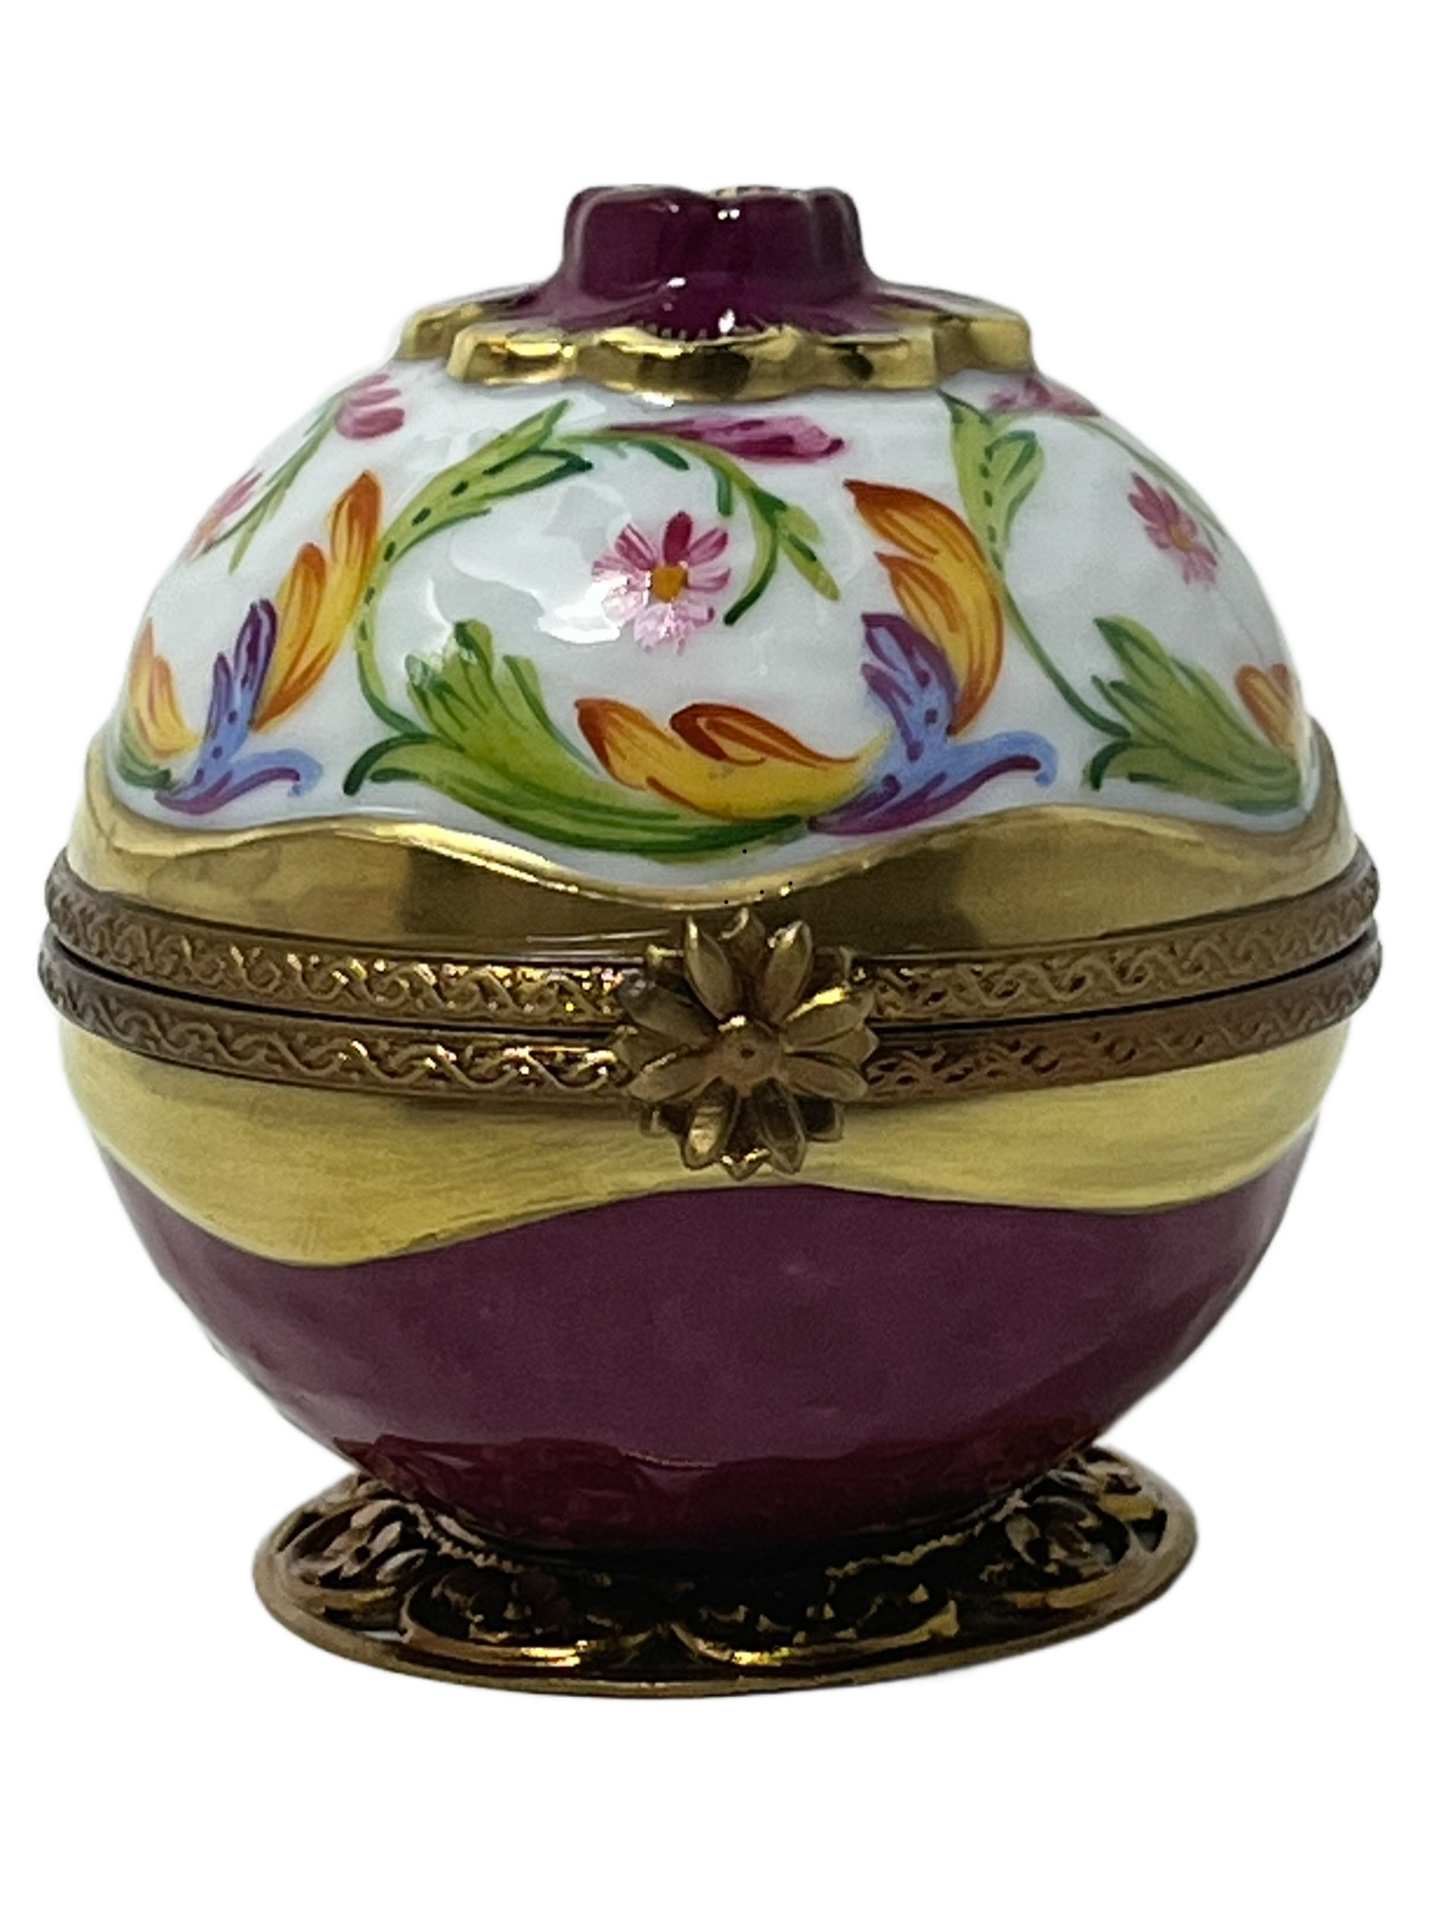 Regal Elegance: Limoges Box - Circular Box with Purple and Gold Accents